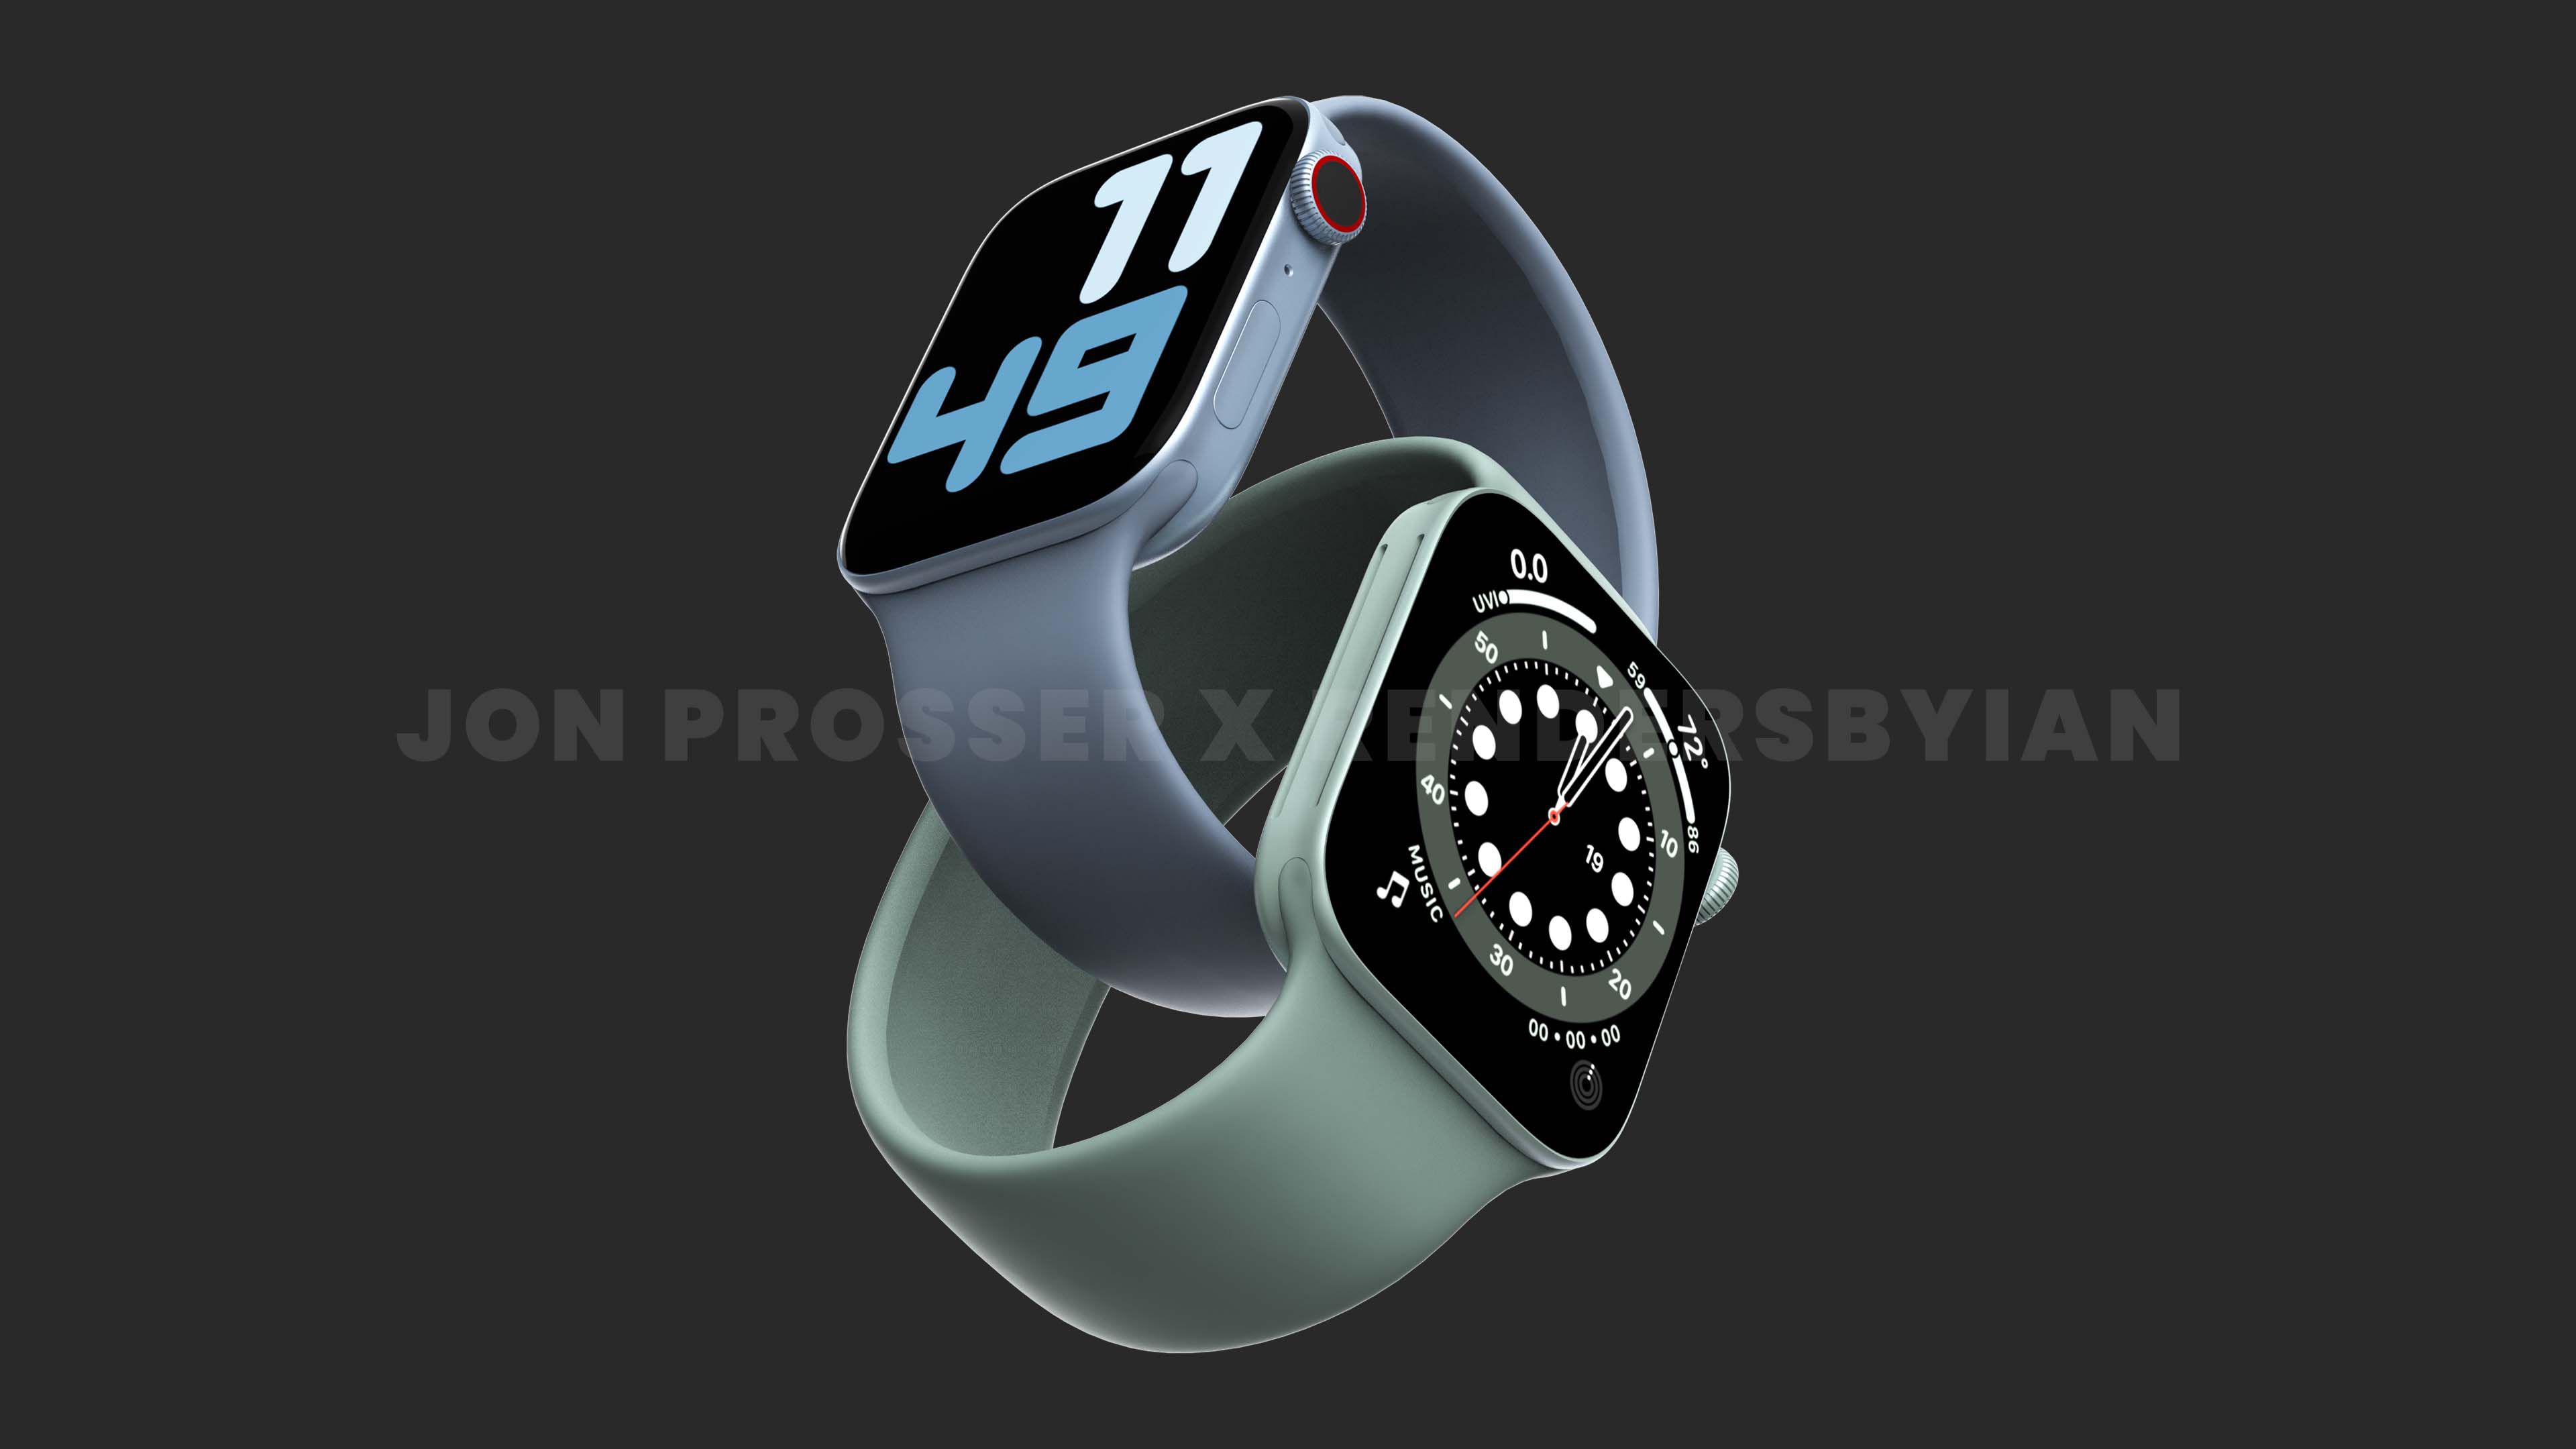 Rumor: Apple Watch Series 7 to Come in Larger 41mm and 45mm Sizes